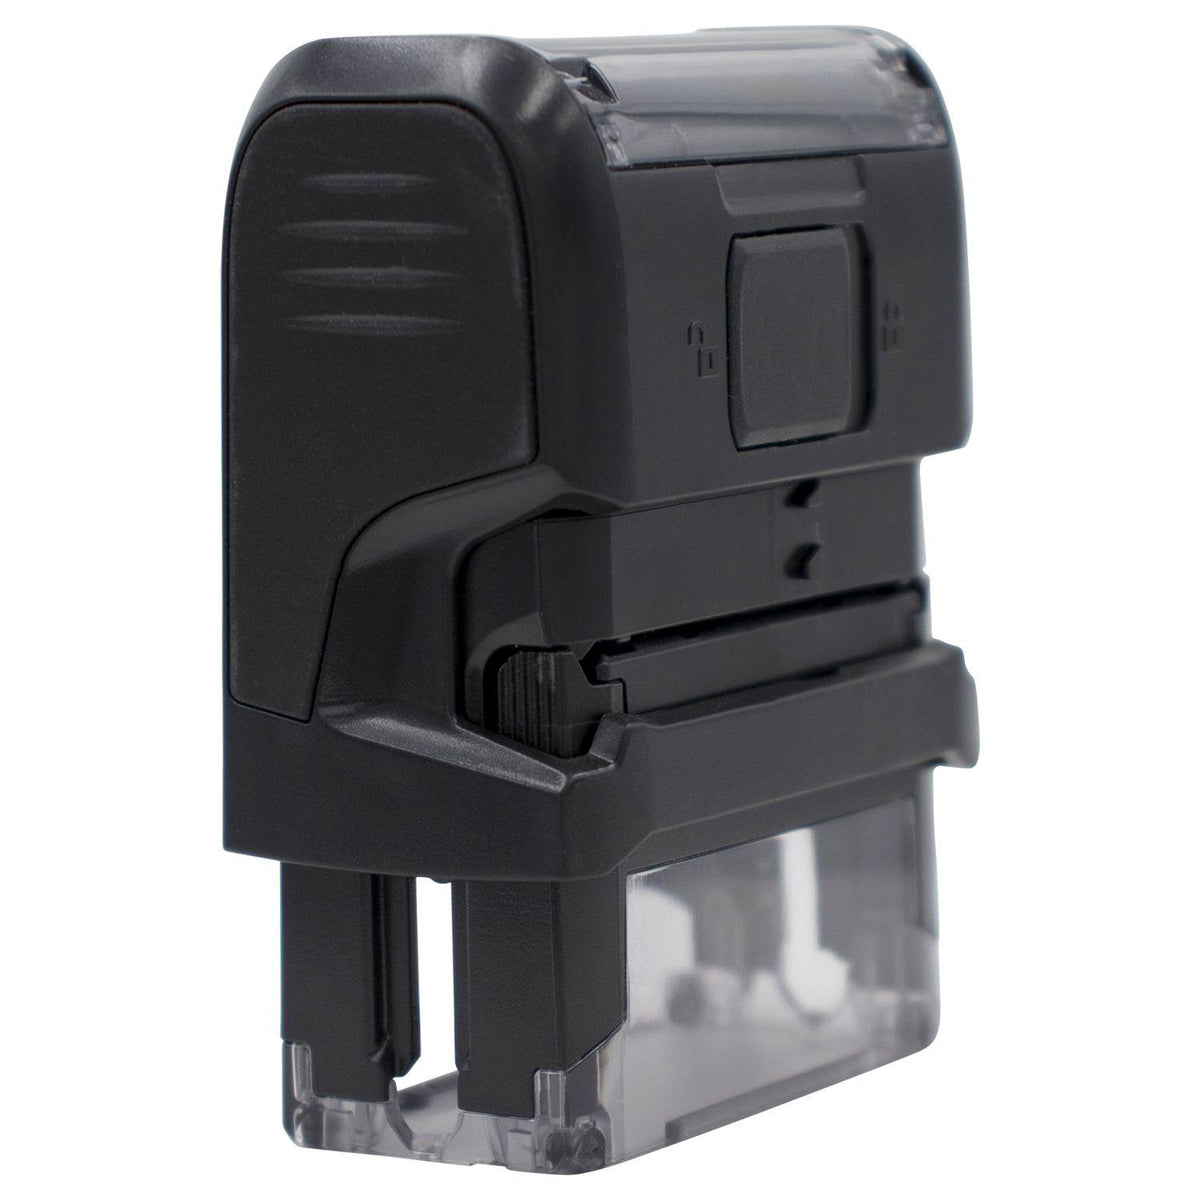 Large Self Inking Copy For Your Information Stamp - Engineer Seal Stamps - Brand_Trodat, Impression Size_Large, Stamp Type_Self-Inking Stamp, Type of Use_Professional